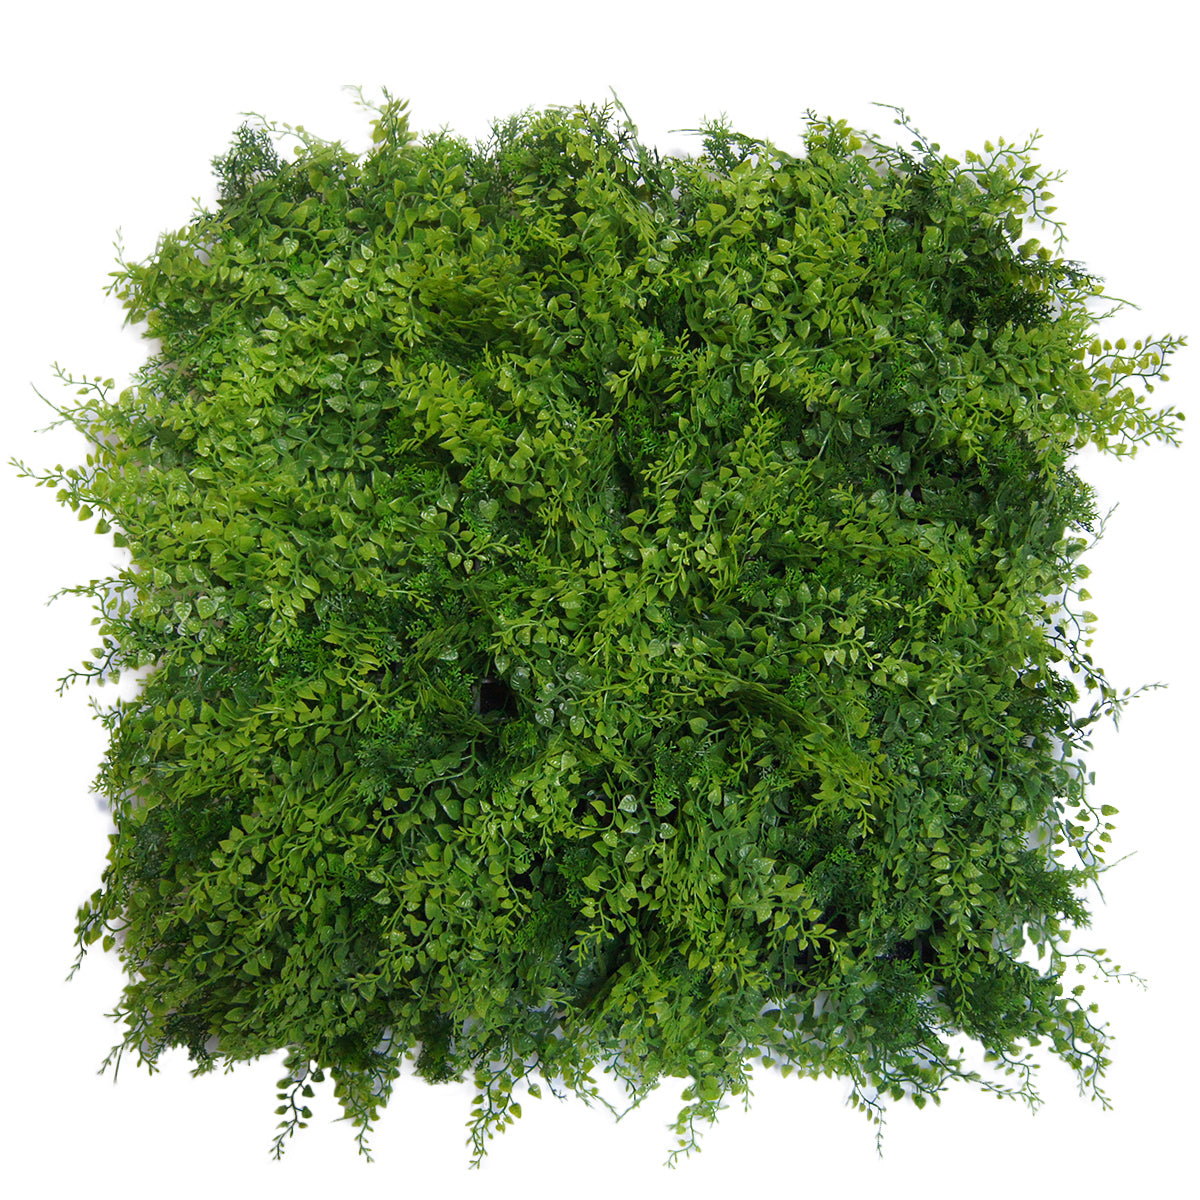 Artificial Plant Living Wall Panels for Indoor/Outdoor Use (4 pack - Maya Style)